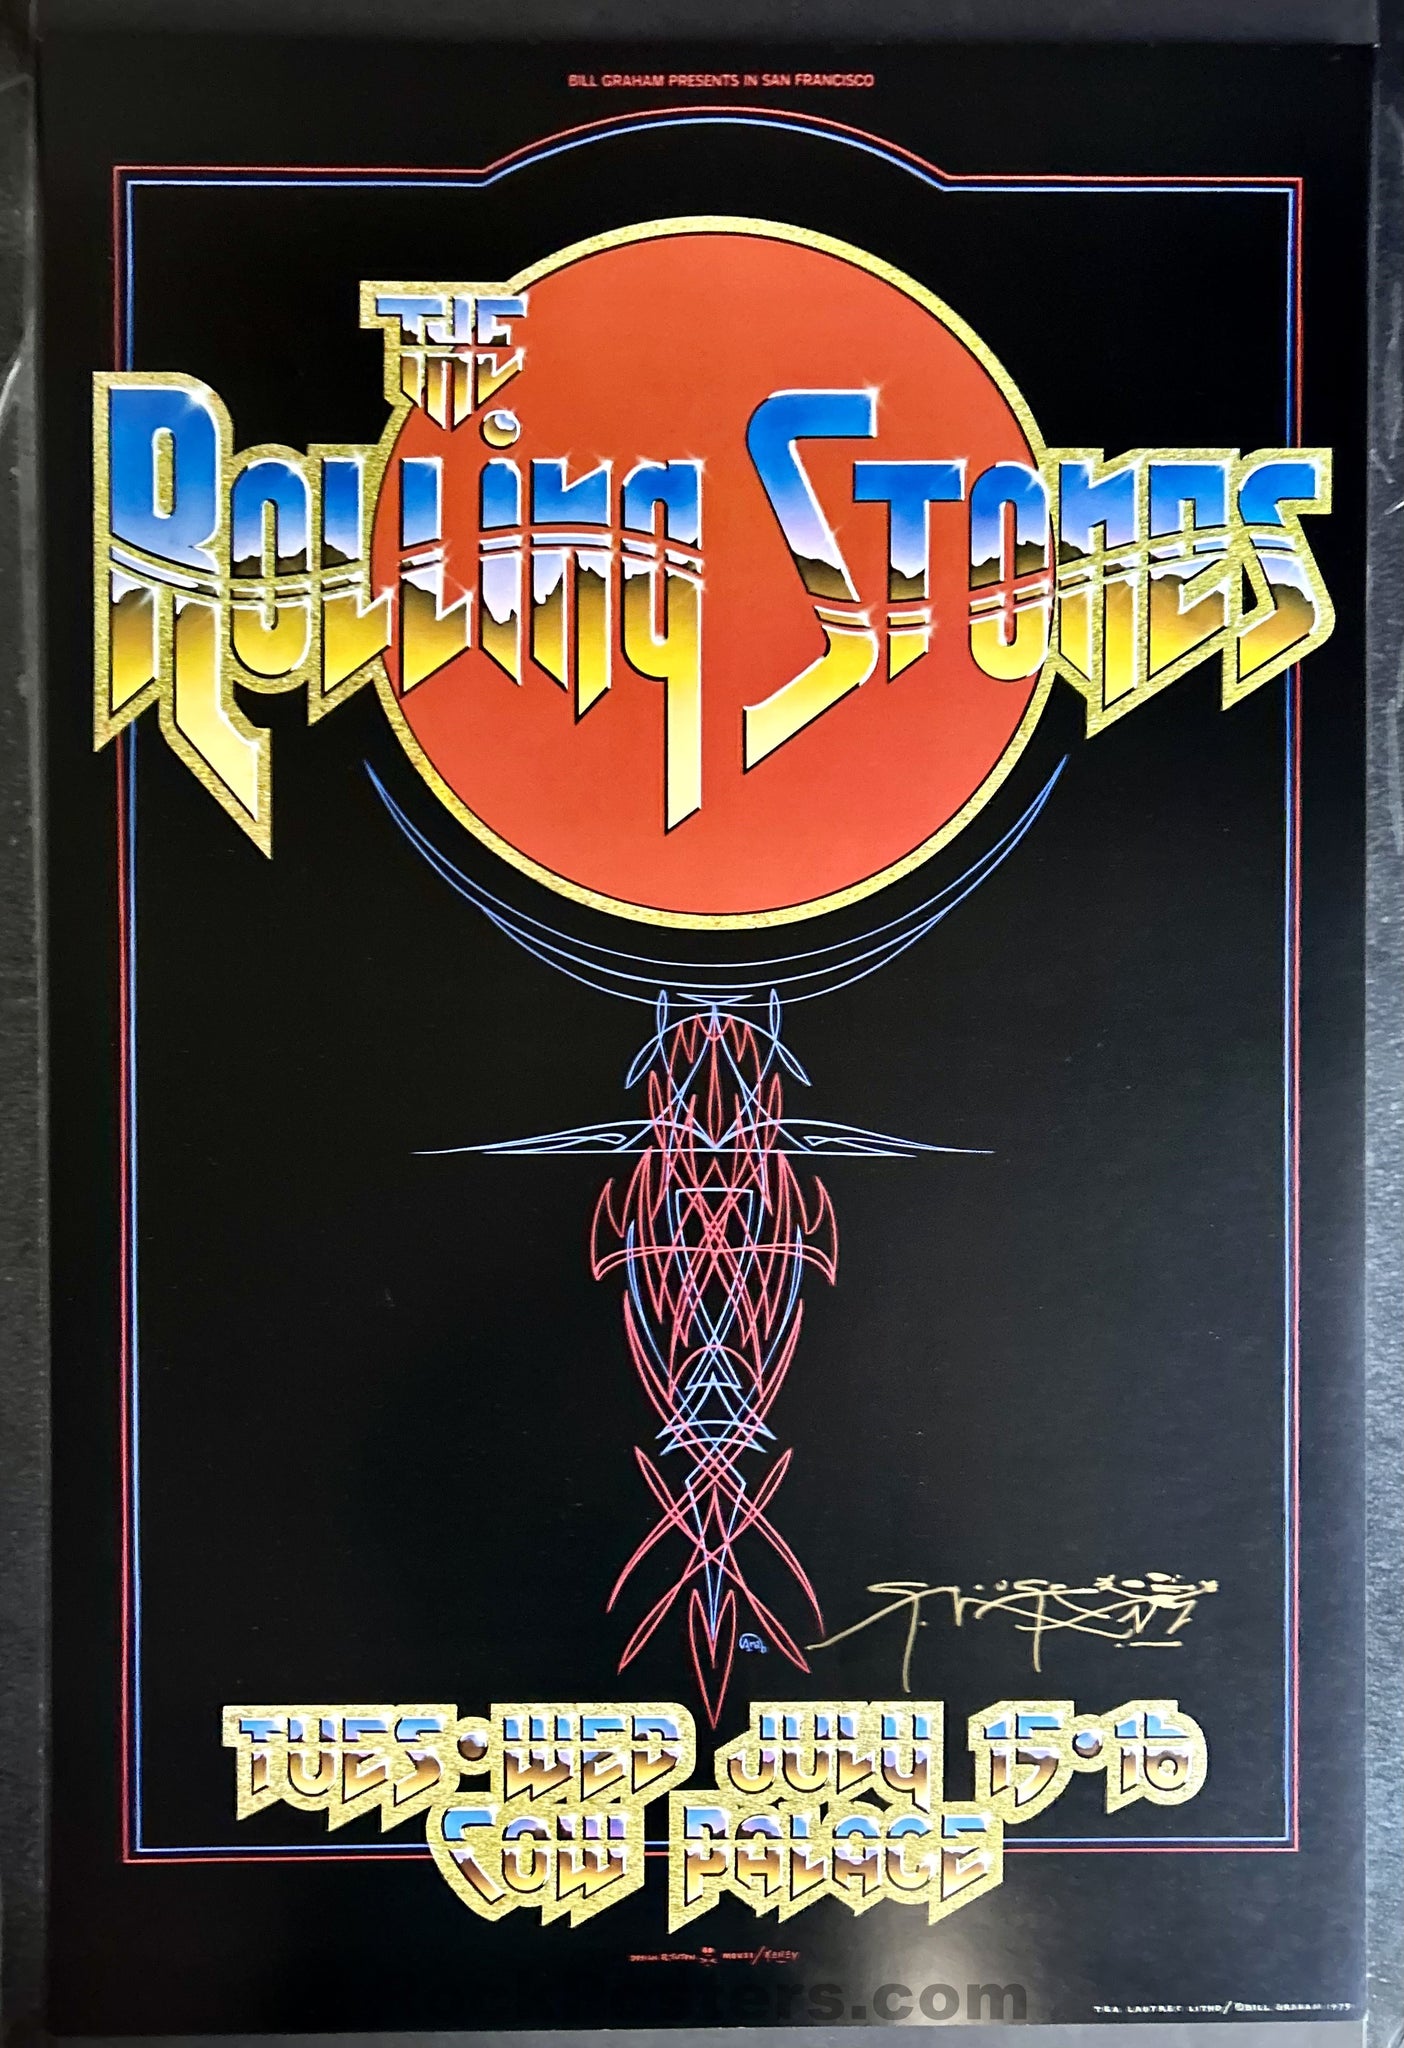 AUCTION - AOR 4.41 - Rolling Stones - Stanley Mouse Signed - 1975 Post ...